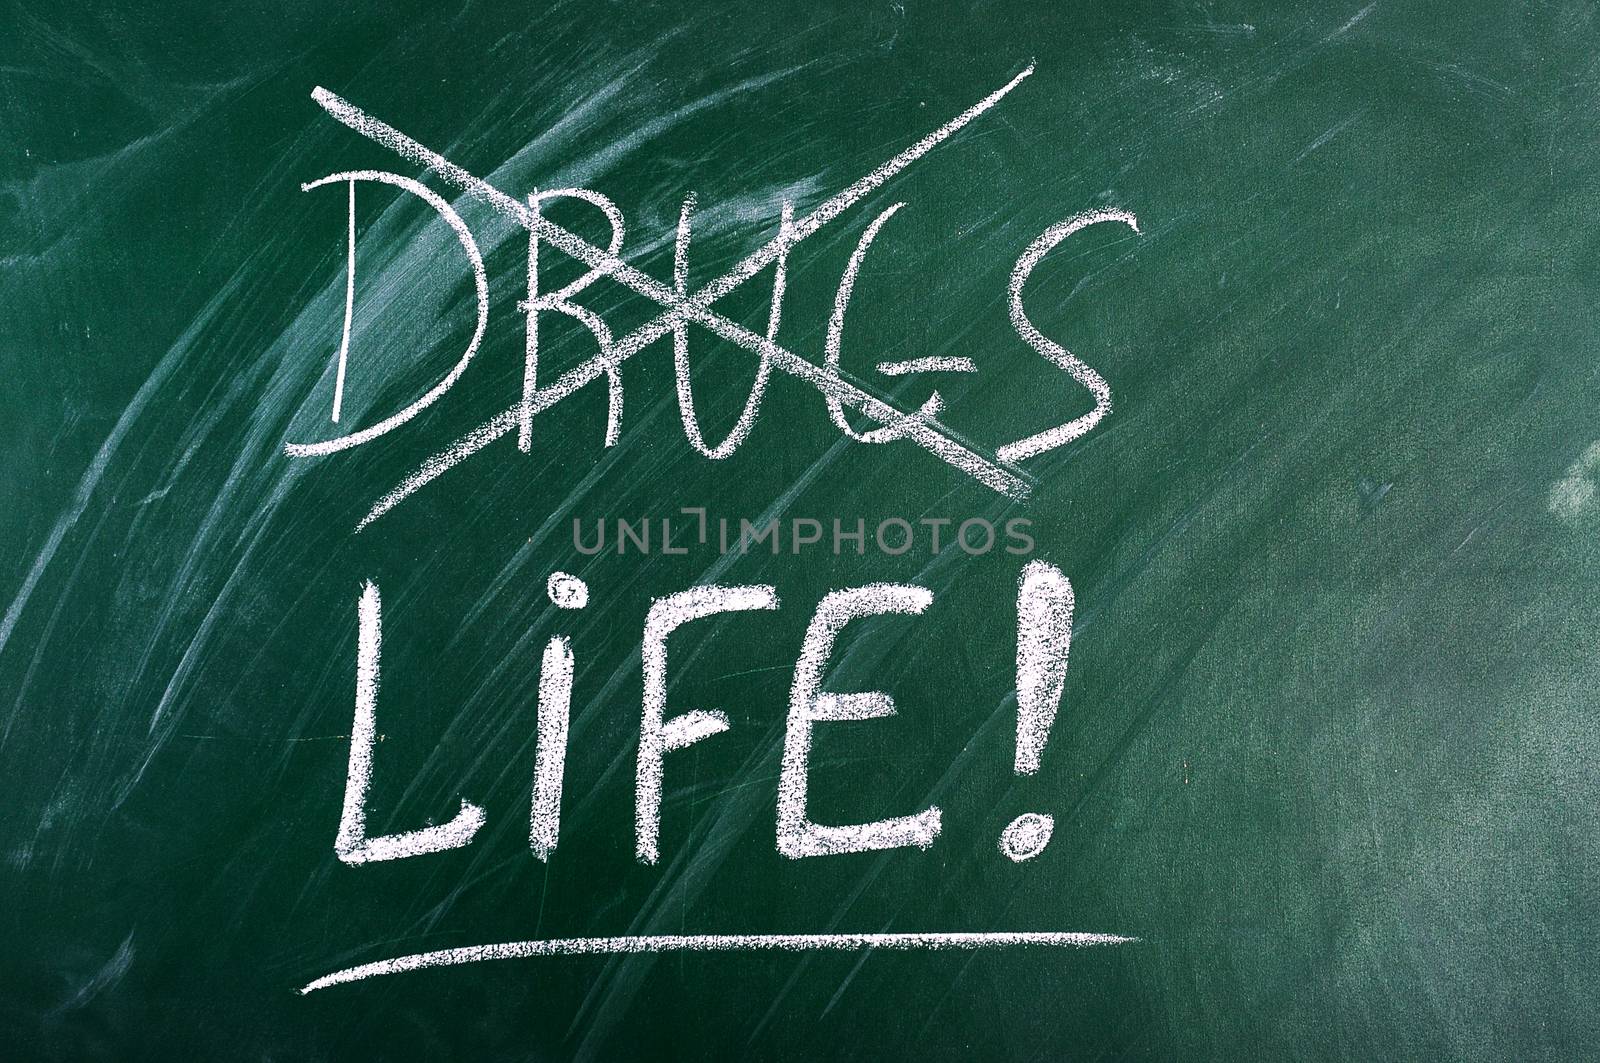 say no to drugs,choice life- message on green chalkboard 